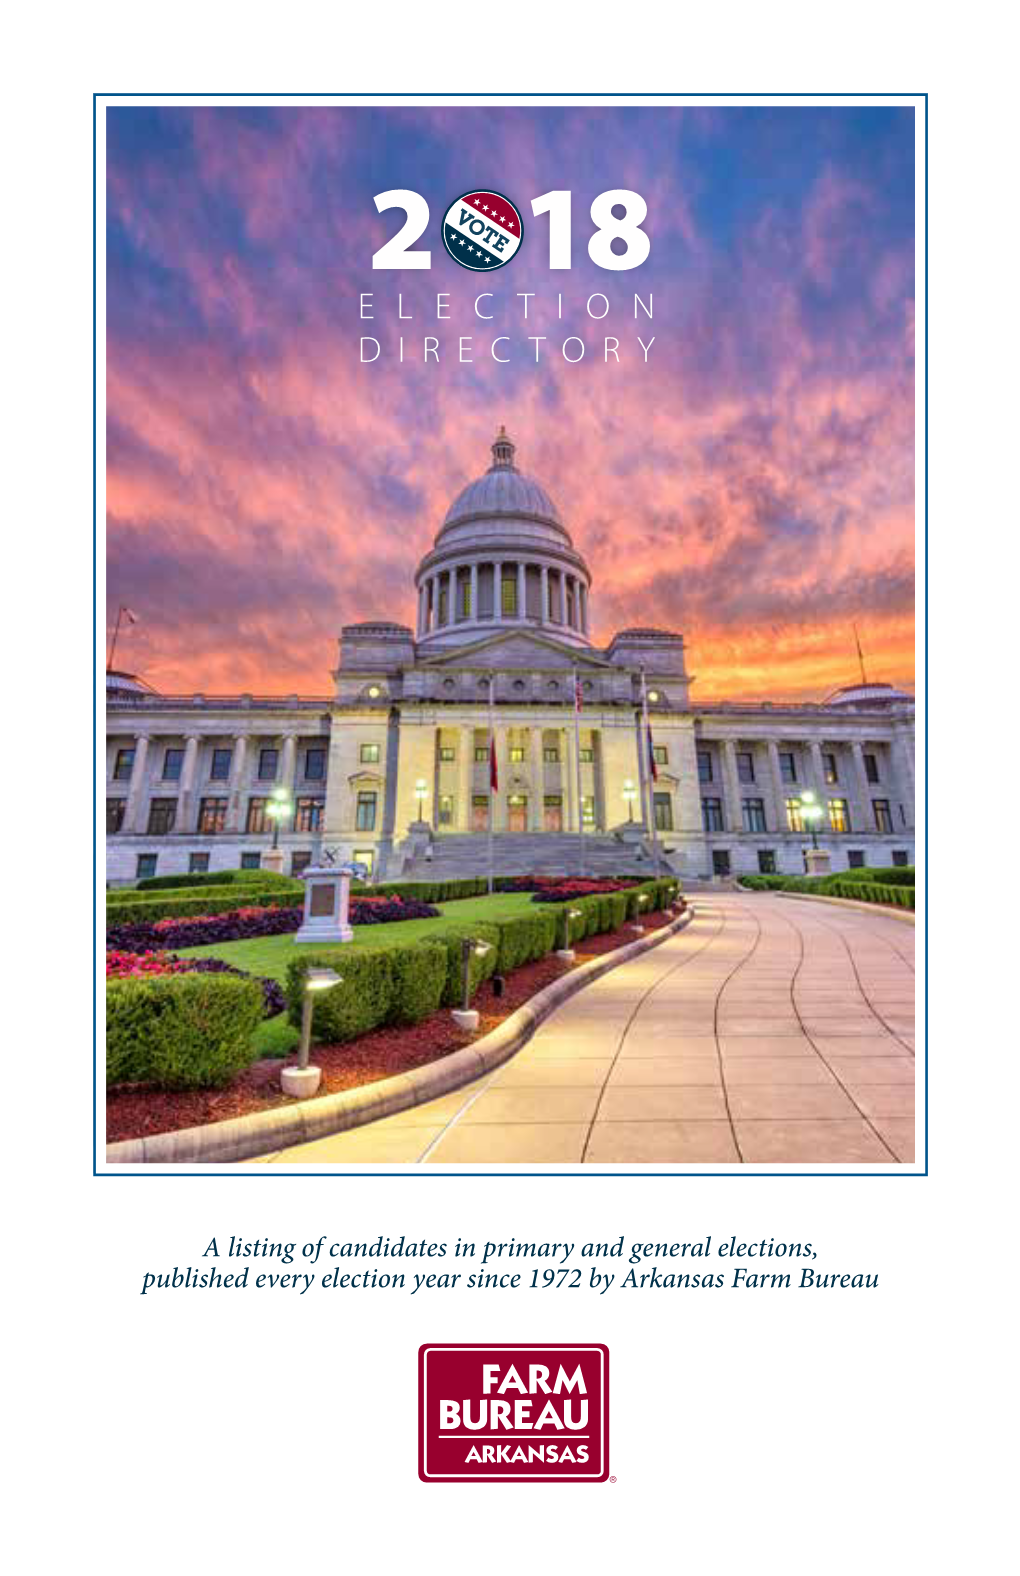 2018 Election Directory Published